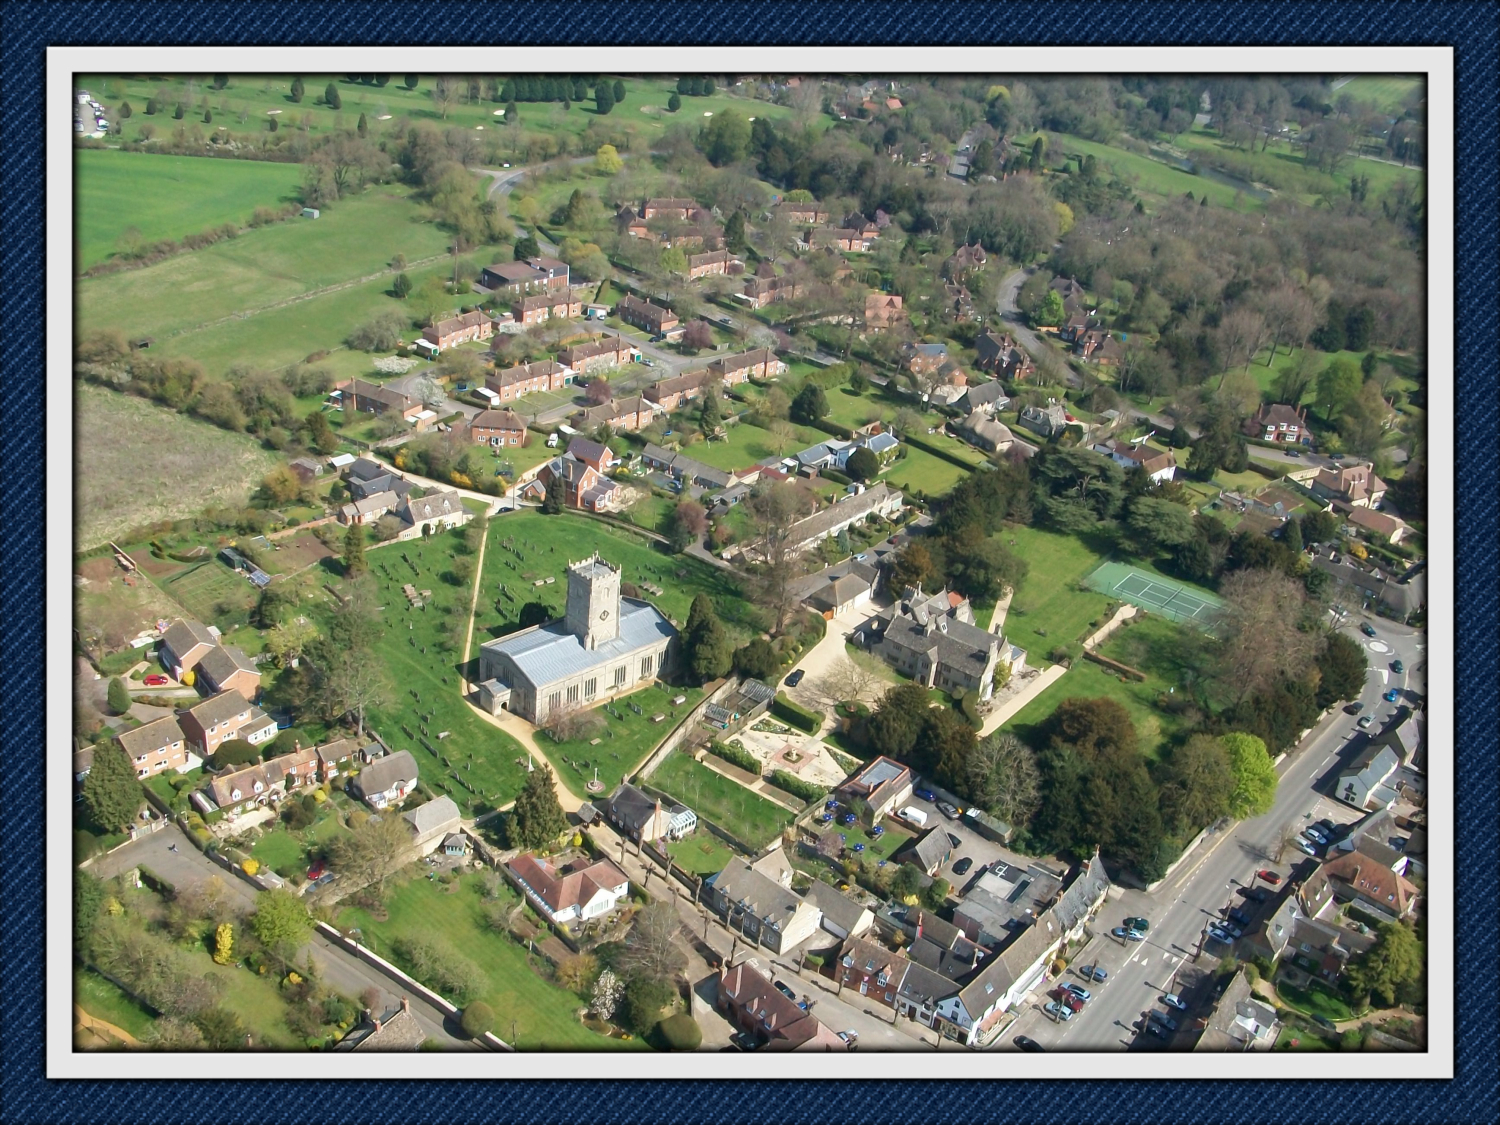 The centre of Shrivenham Village from the air